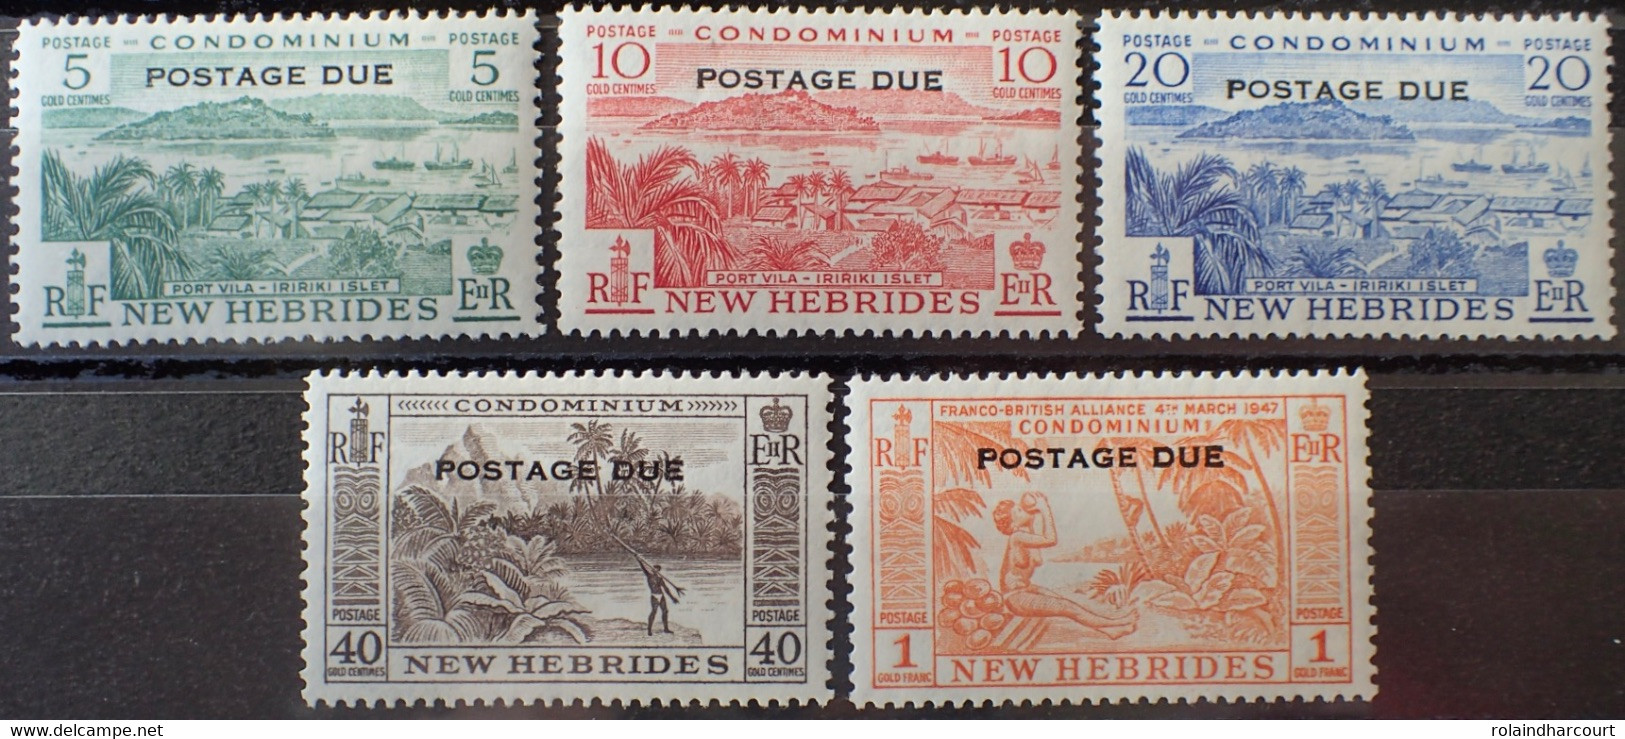 R2452/839 - 1957 - COLONIES FR. - NOUVELLES HEBRIDES - TIMBRES TAXE - SERIE COMPLETE - N°41 à 45 NEUFS* - Timbres-taxe